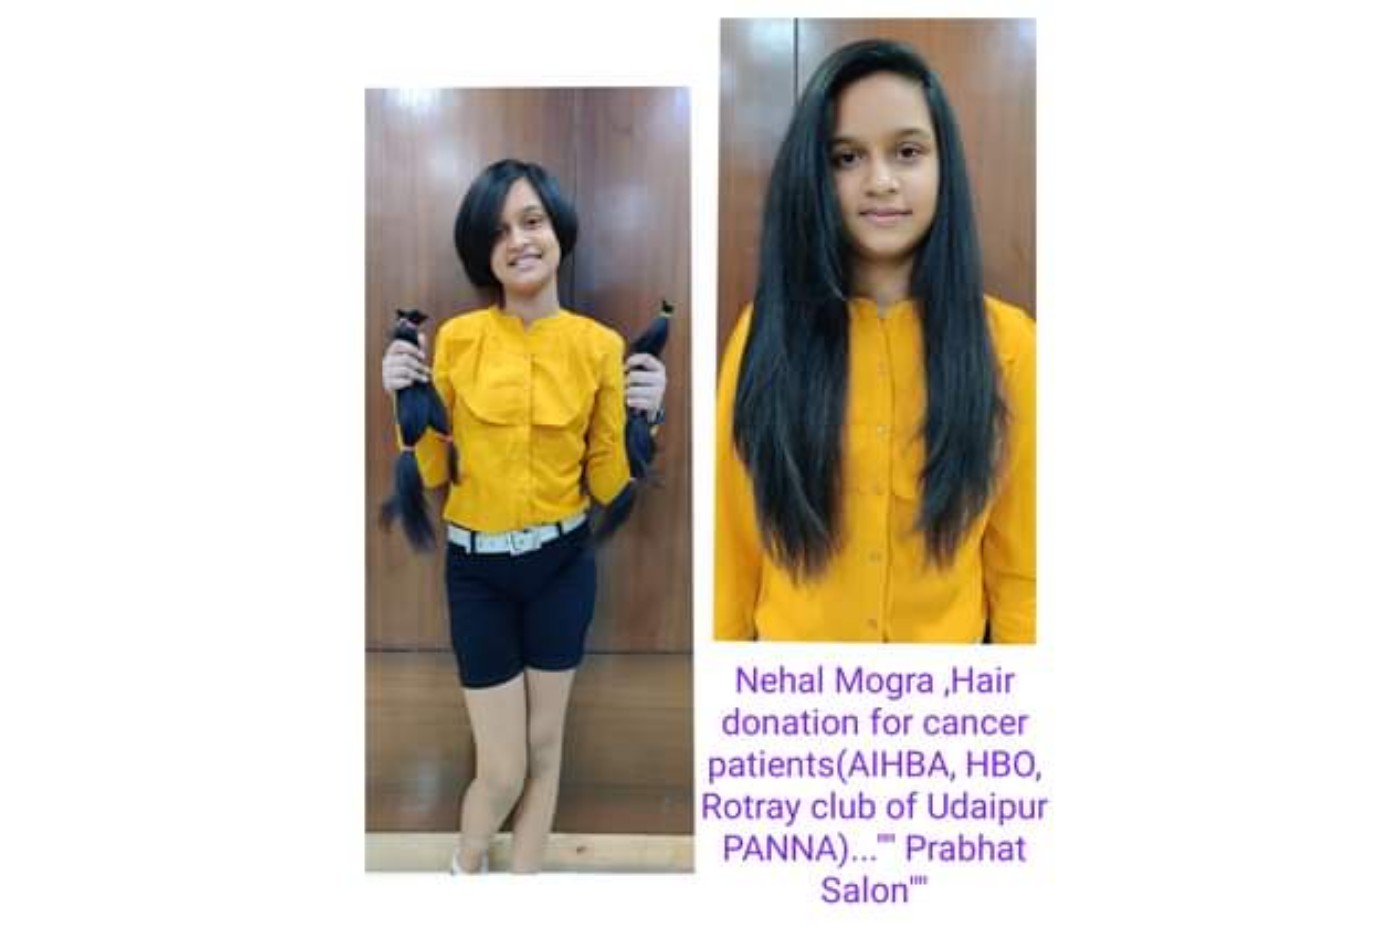 National Hair Donation Day celebrated by Prabhat Salon on March 7